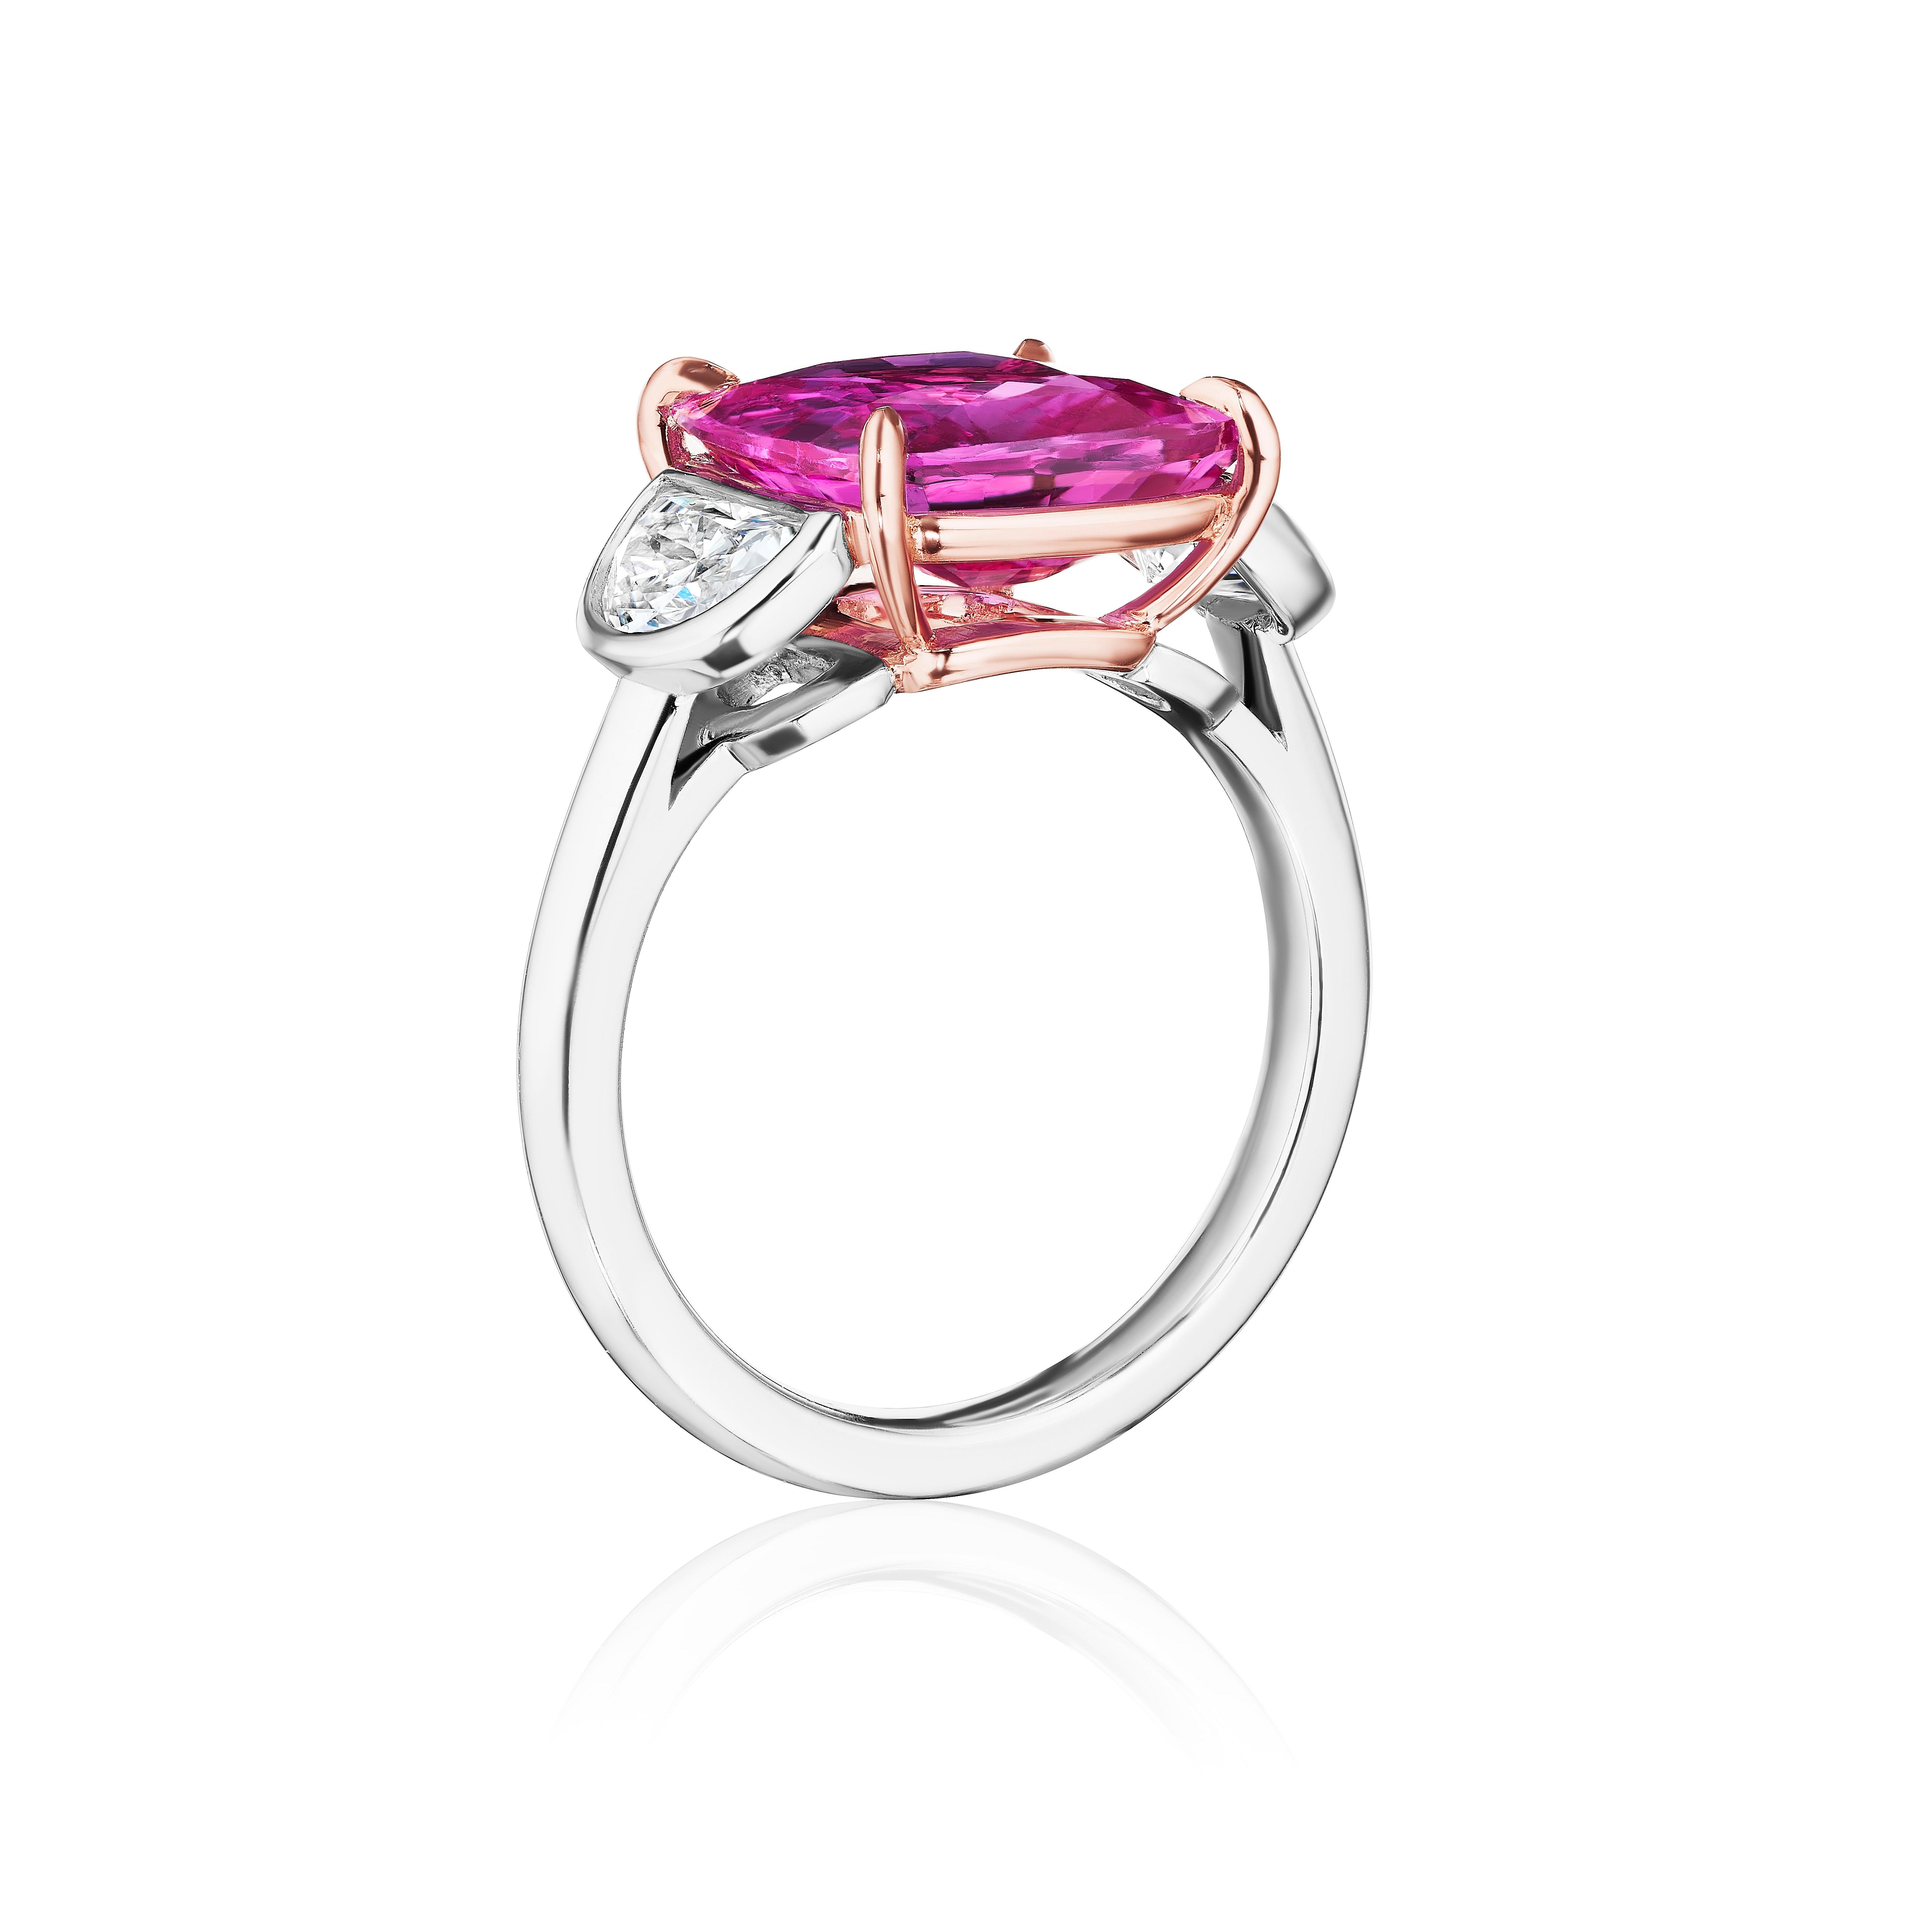 Pink Sapphire and Diamond Three Stone Ring. 

Centered upon a Cushion Cut Pink Sapphire weighing 5.07 Carats with GIA certificate stating the stone is heated and from the mines of Madagascar. 
Flanked by Half Moon Diamonds weighing 0.84 Carats of F